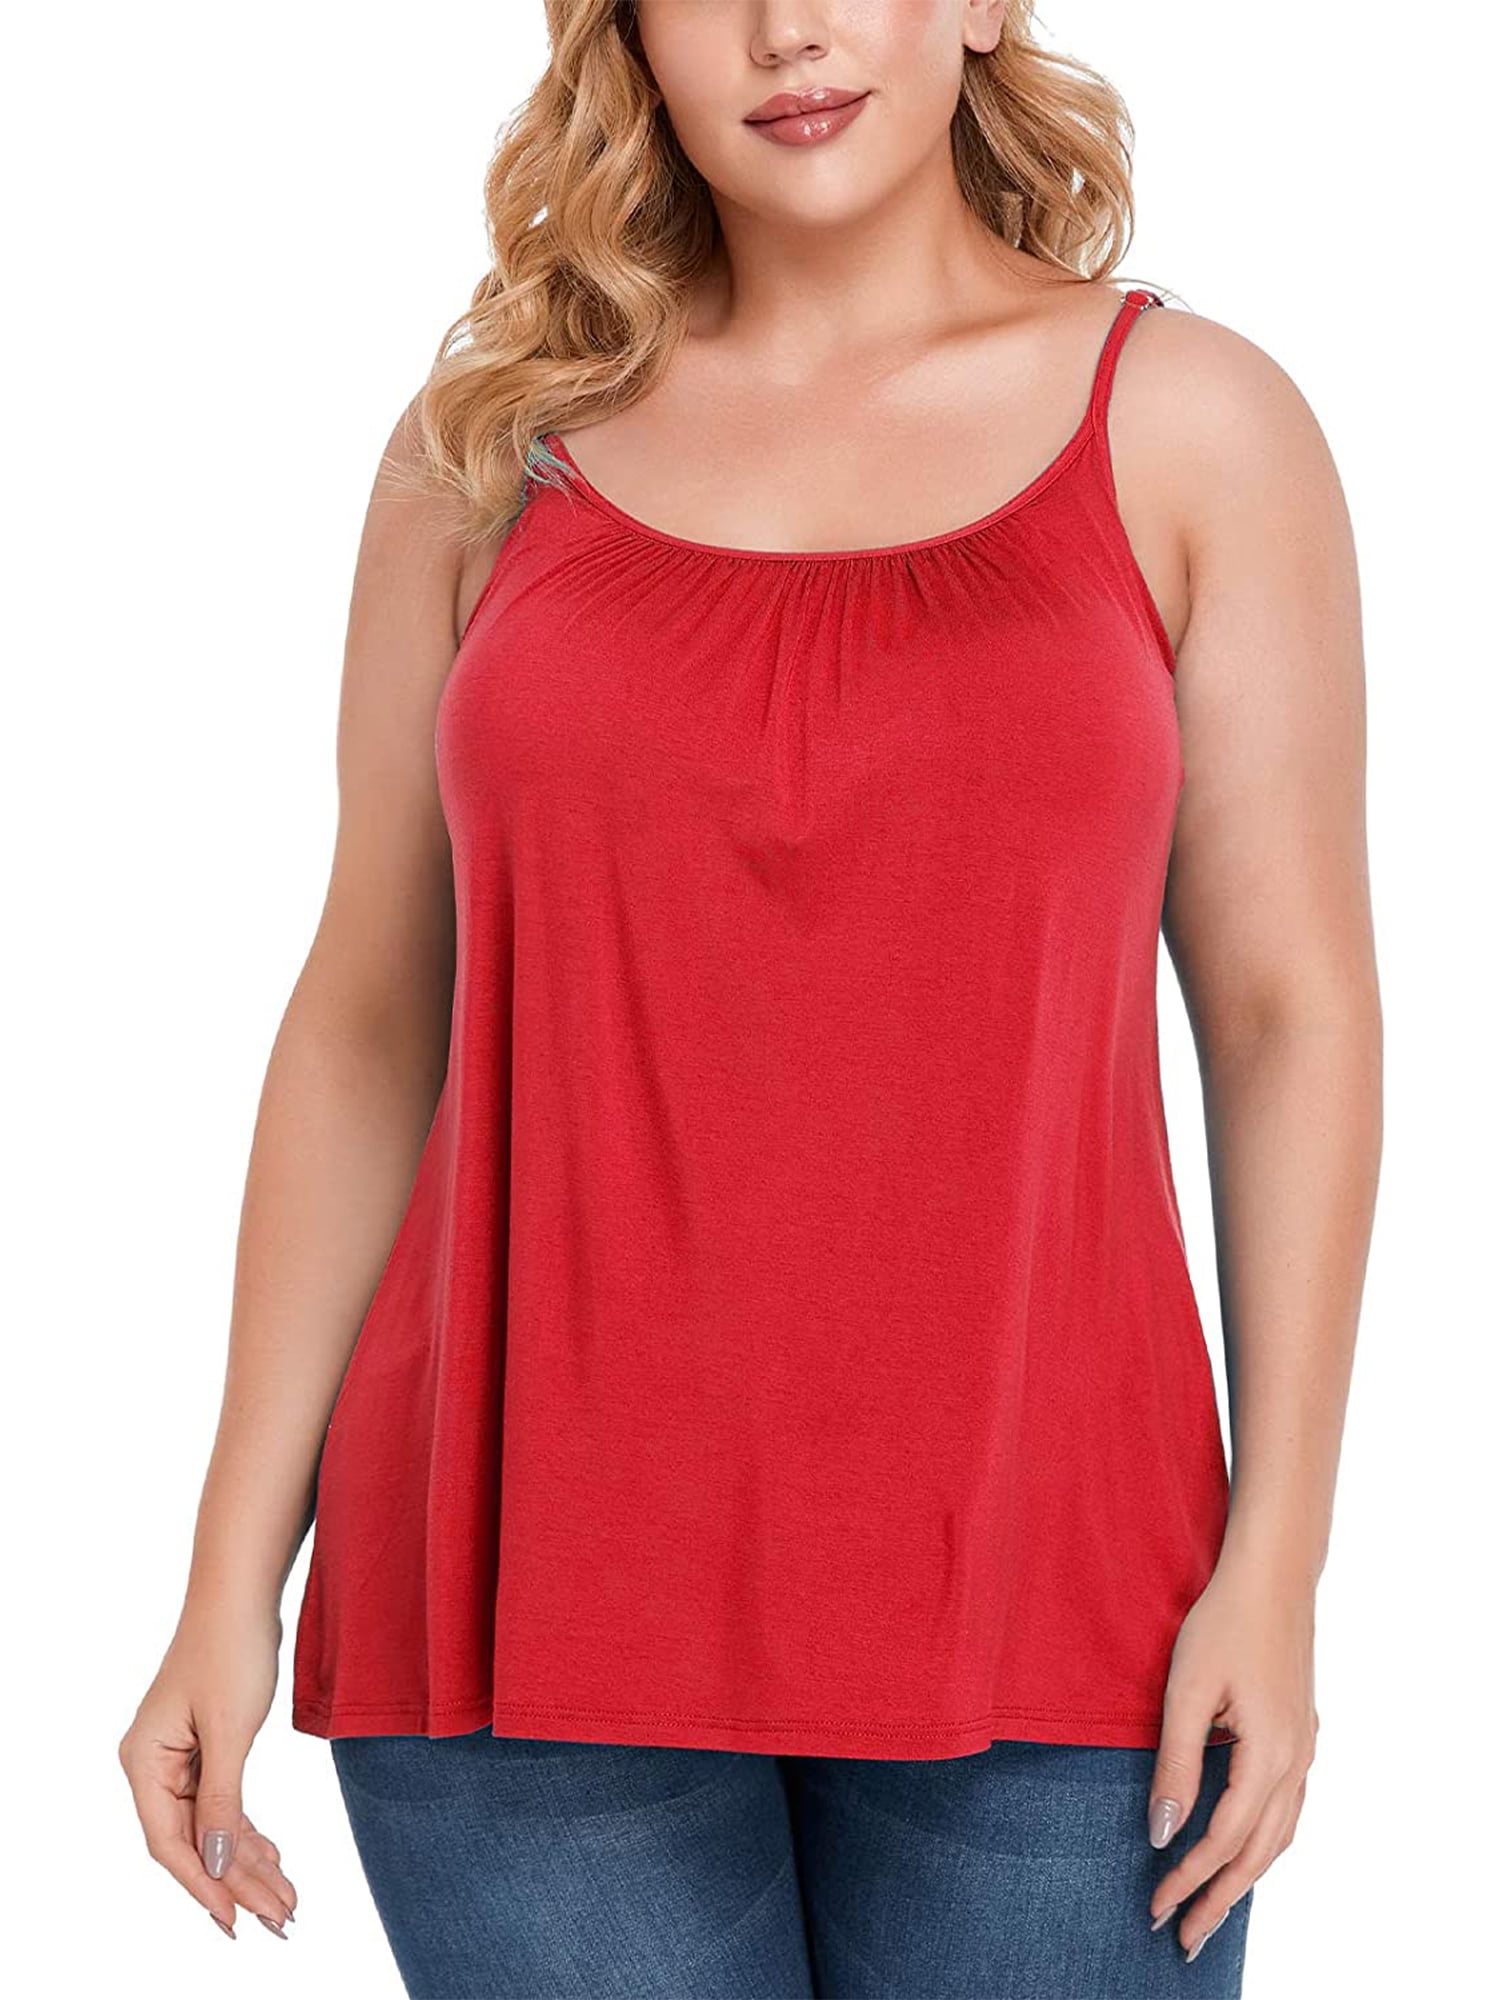 FITVALEN Women's Plus Size Camisole with Built in Bra Casual Loose Tank  Tops Sleeveless Crew Neck Shirts Flowy Cami with Adjustable Straps (S-4XL）